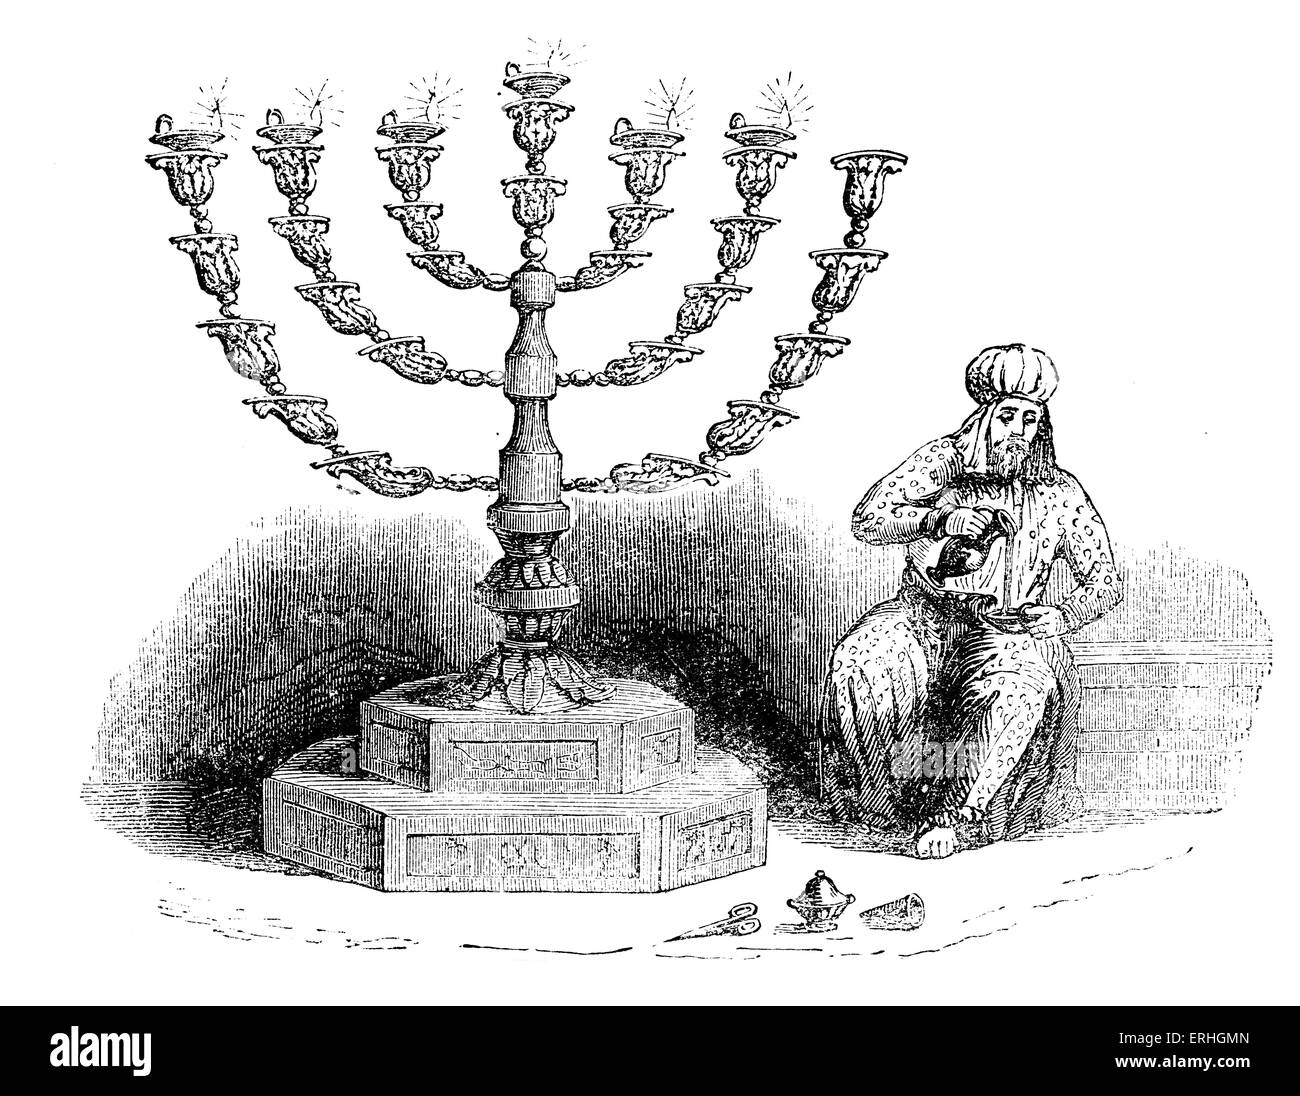 Menorah  - illustration of the seven branched candlestick holder from Biblical times. Stock Photo